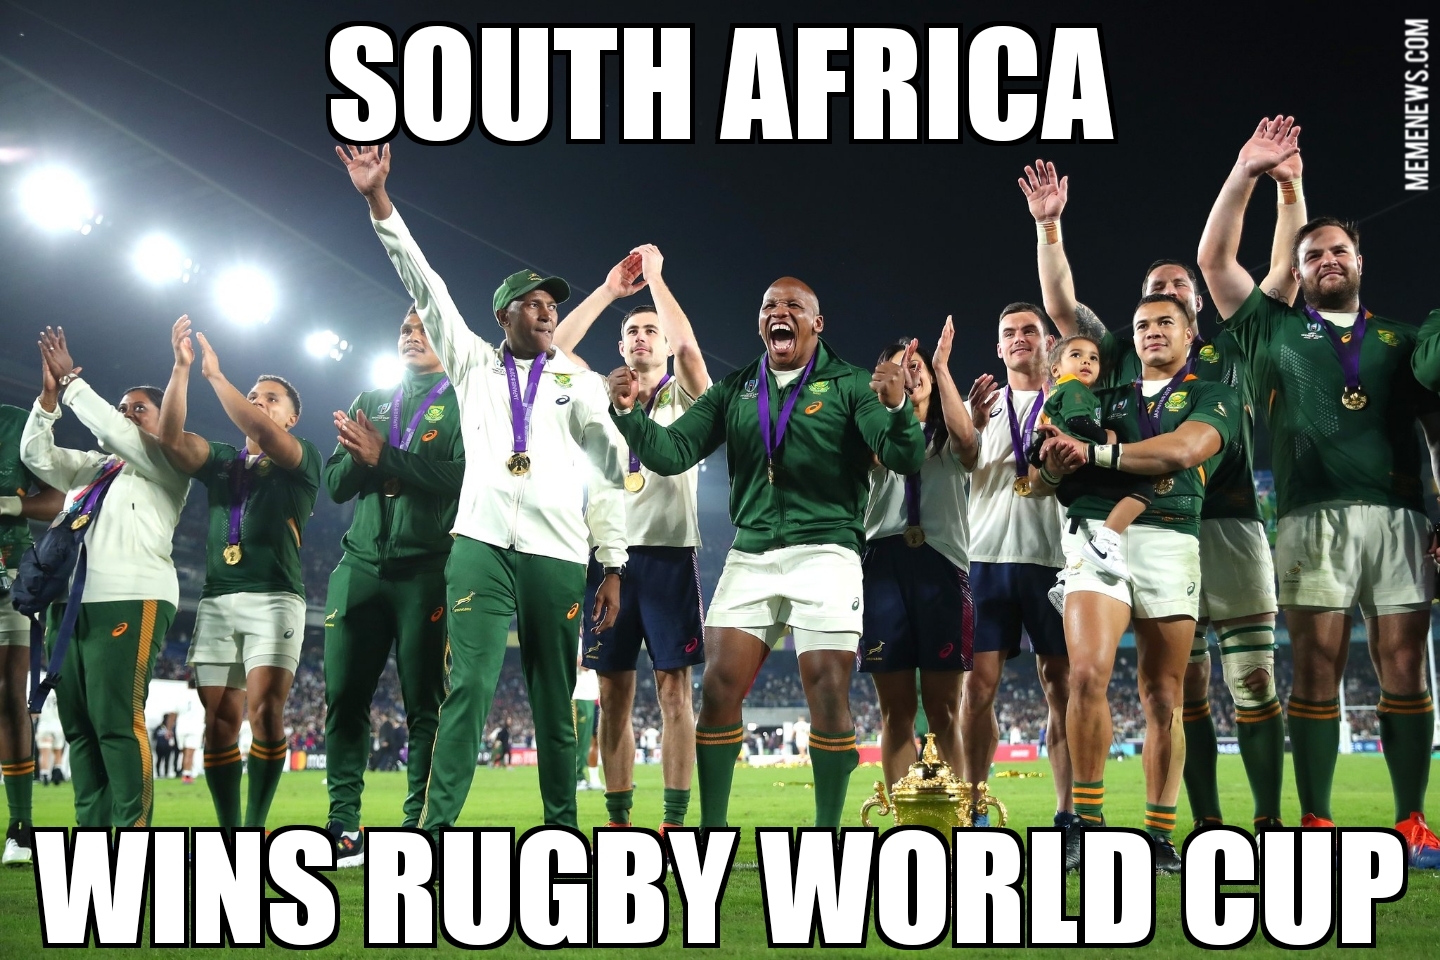 South Africa wins Rugby World Cup